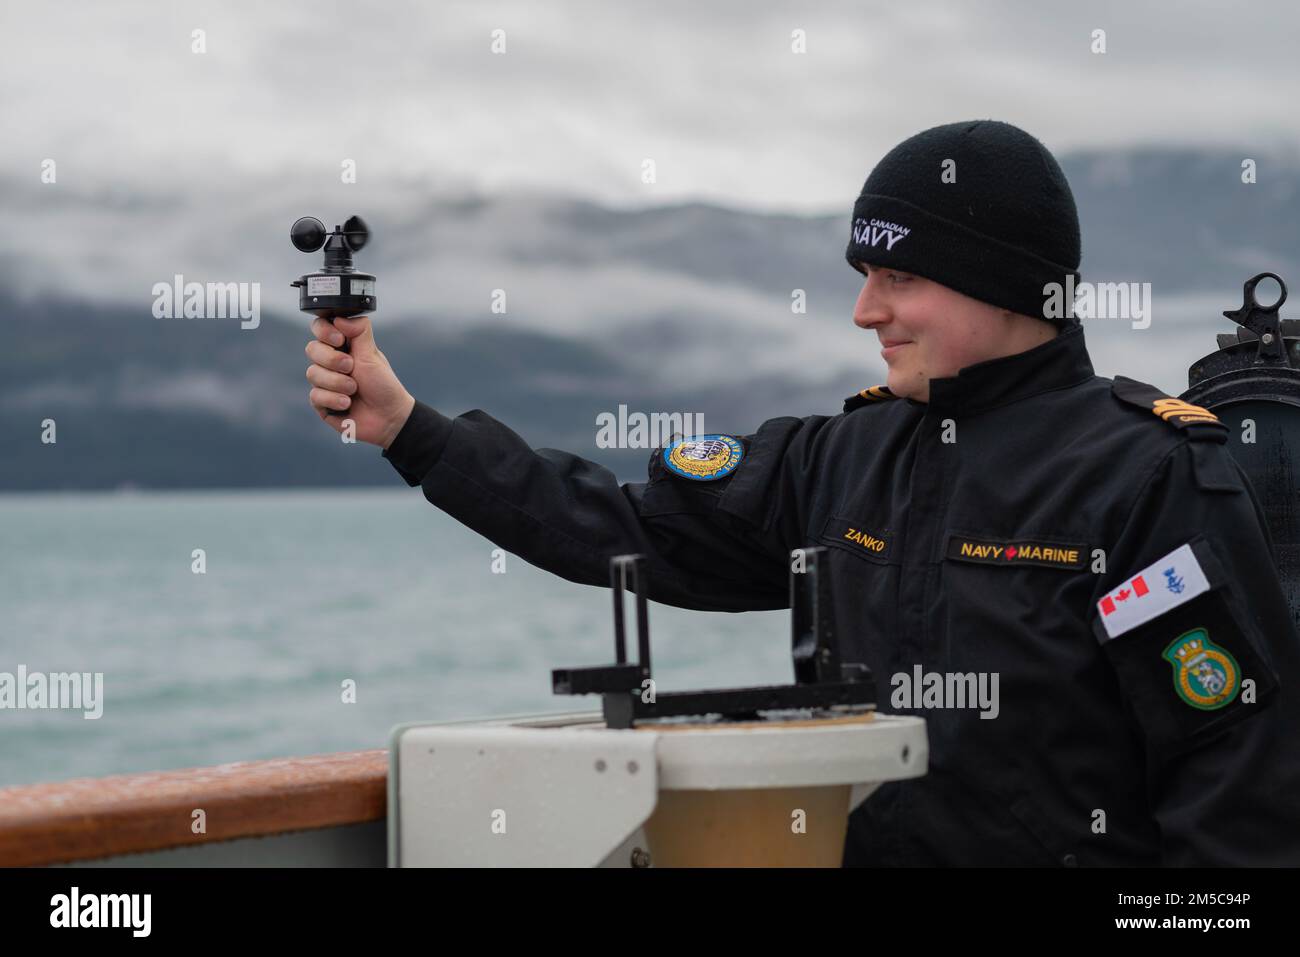 Sub-lieutenant Nick Zanko measures wind speed using a handheld anemometer on board Her Majesty's Canadian Ship Brandon during the entrance of Juneau, Alaska, Feb. 28, 2022. Canadian Armed Forces are participating in Exercise ARCTIC EDGE 2022, a U.S. Northern Command biennial exercise designed to demonstrate and exercise the ability to rapidly deploy and operate in the Arctic.Photo: Lieutenant (N) Pamela Hogan Stock Photo